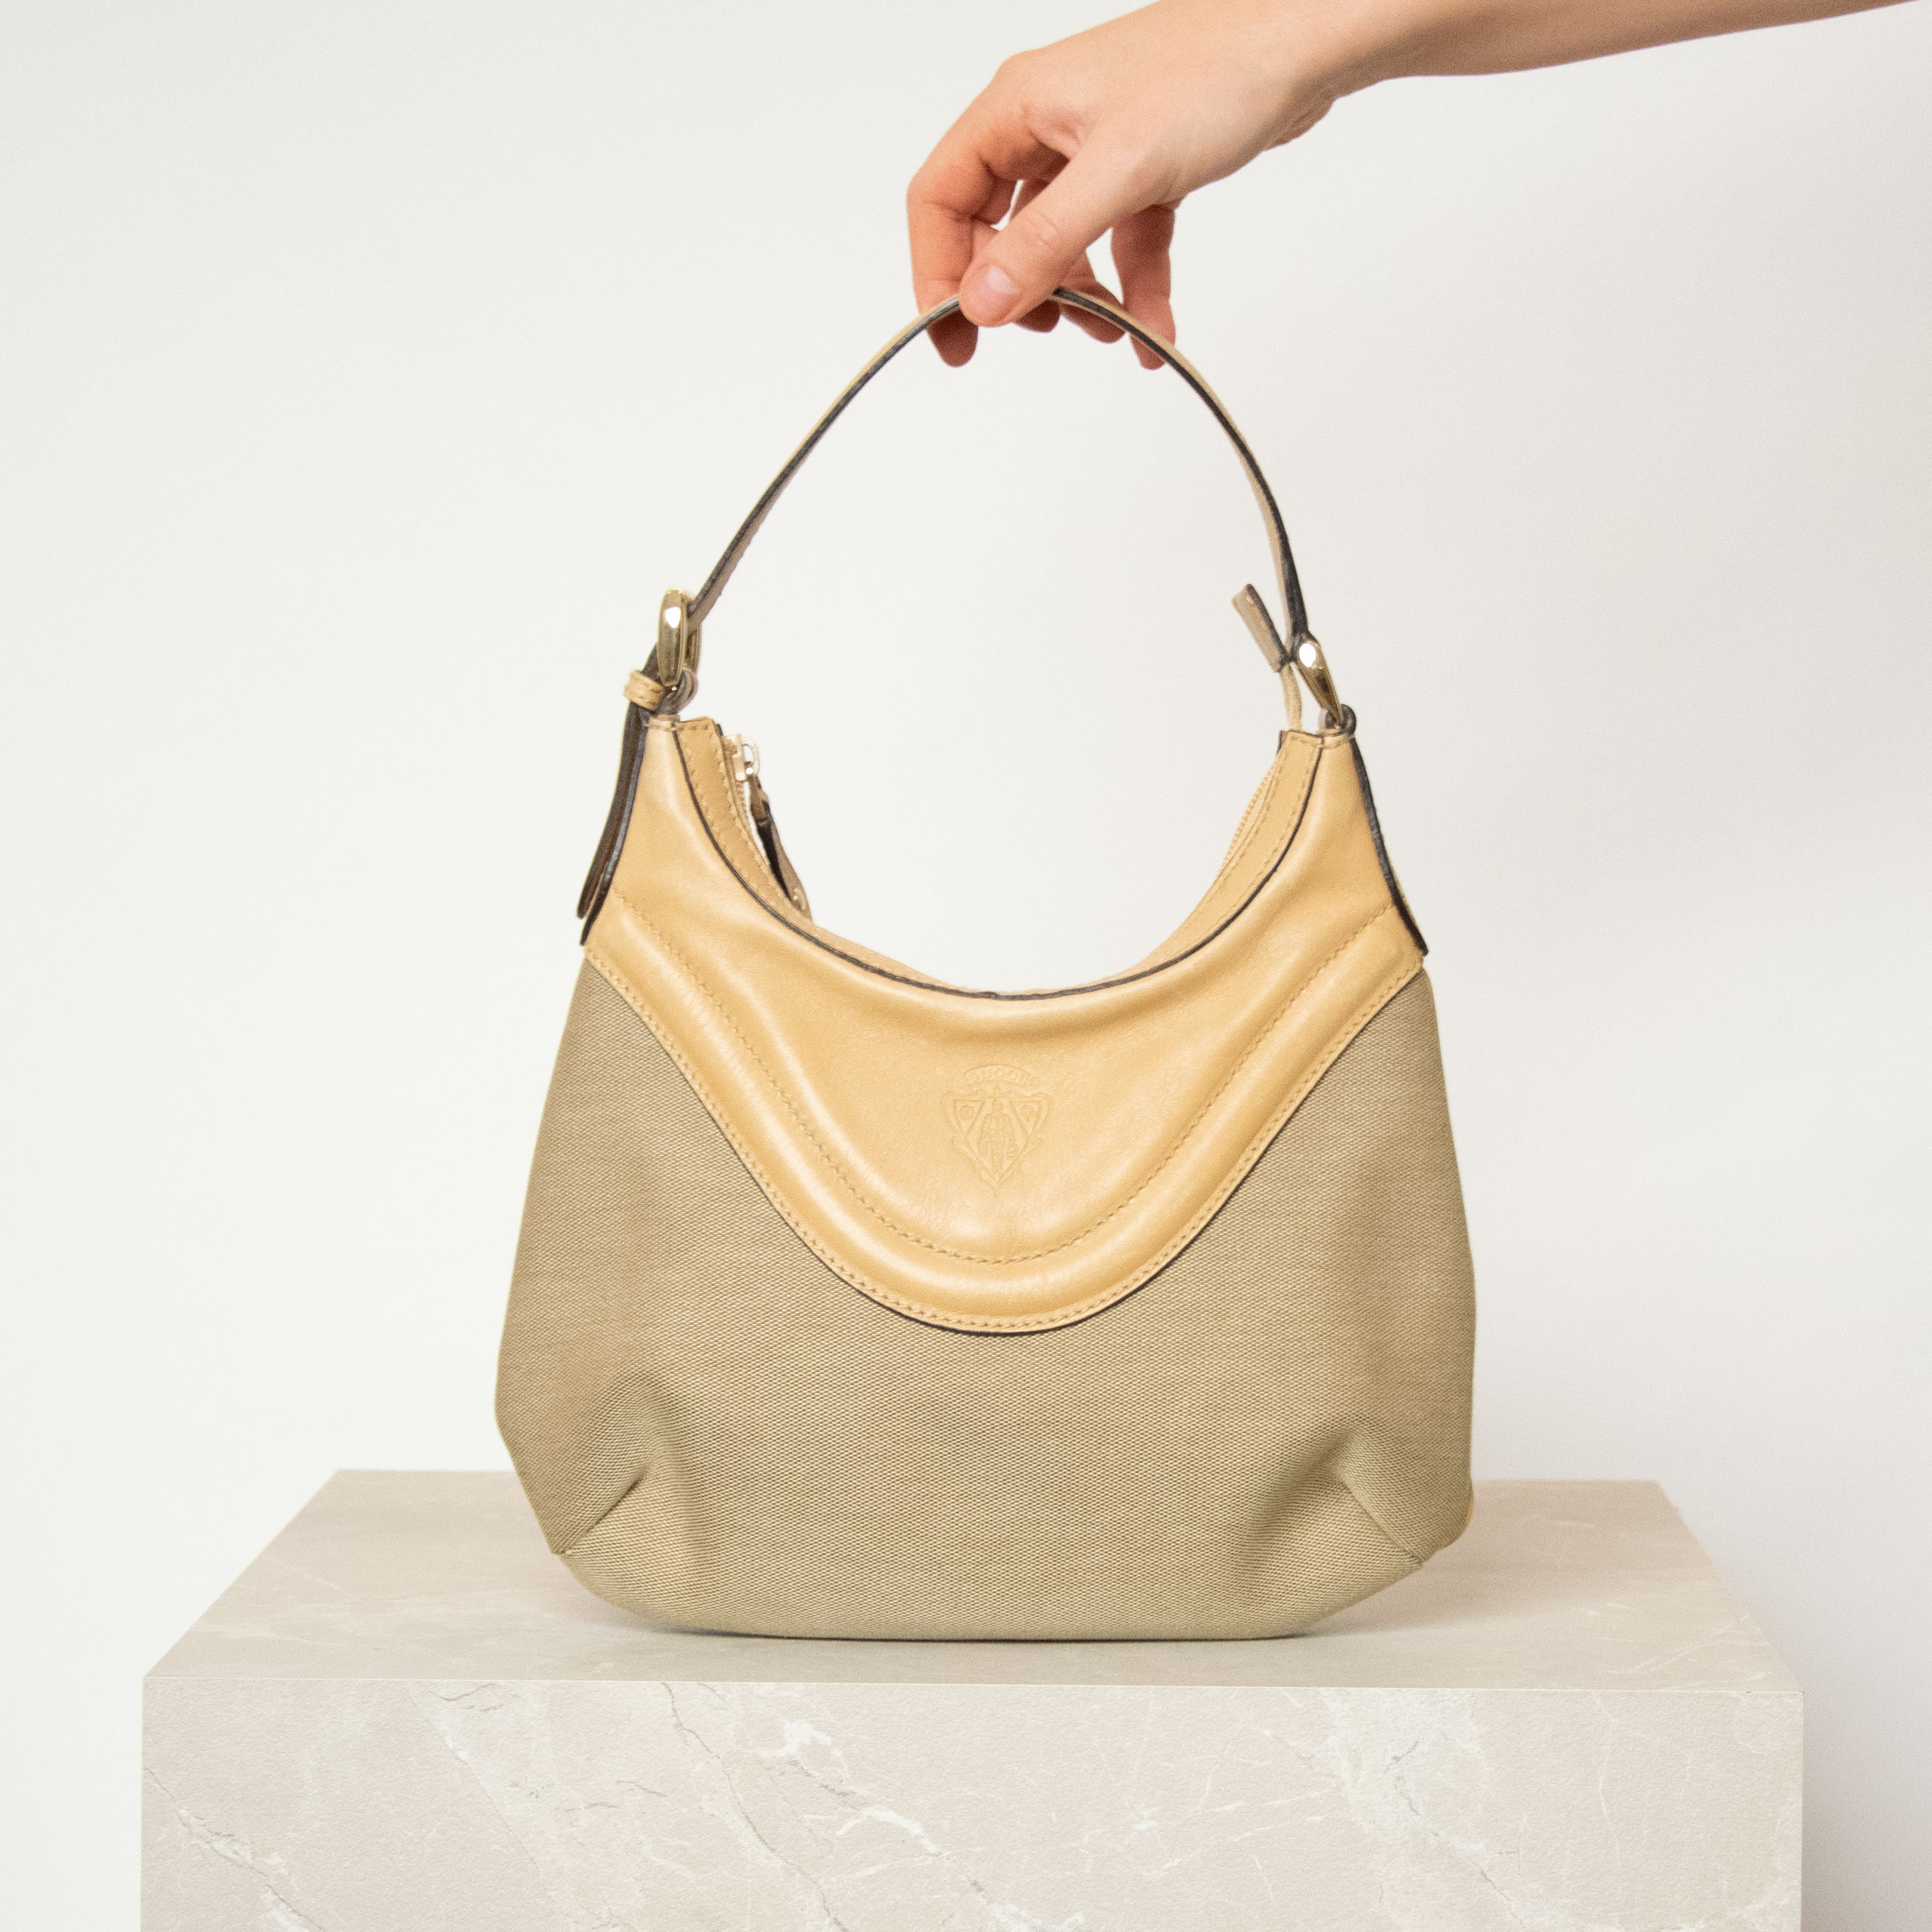 Gucci Hysteria Crest Hobo Bag Beige Small Canvas with Leather